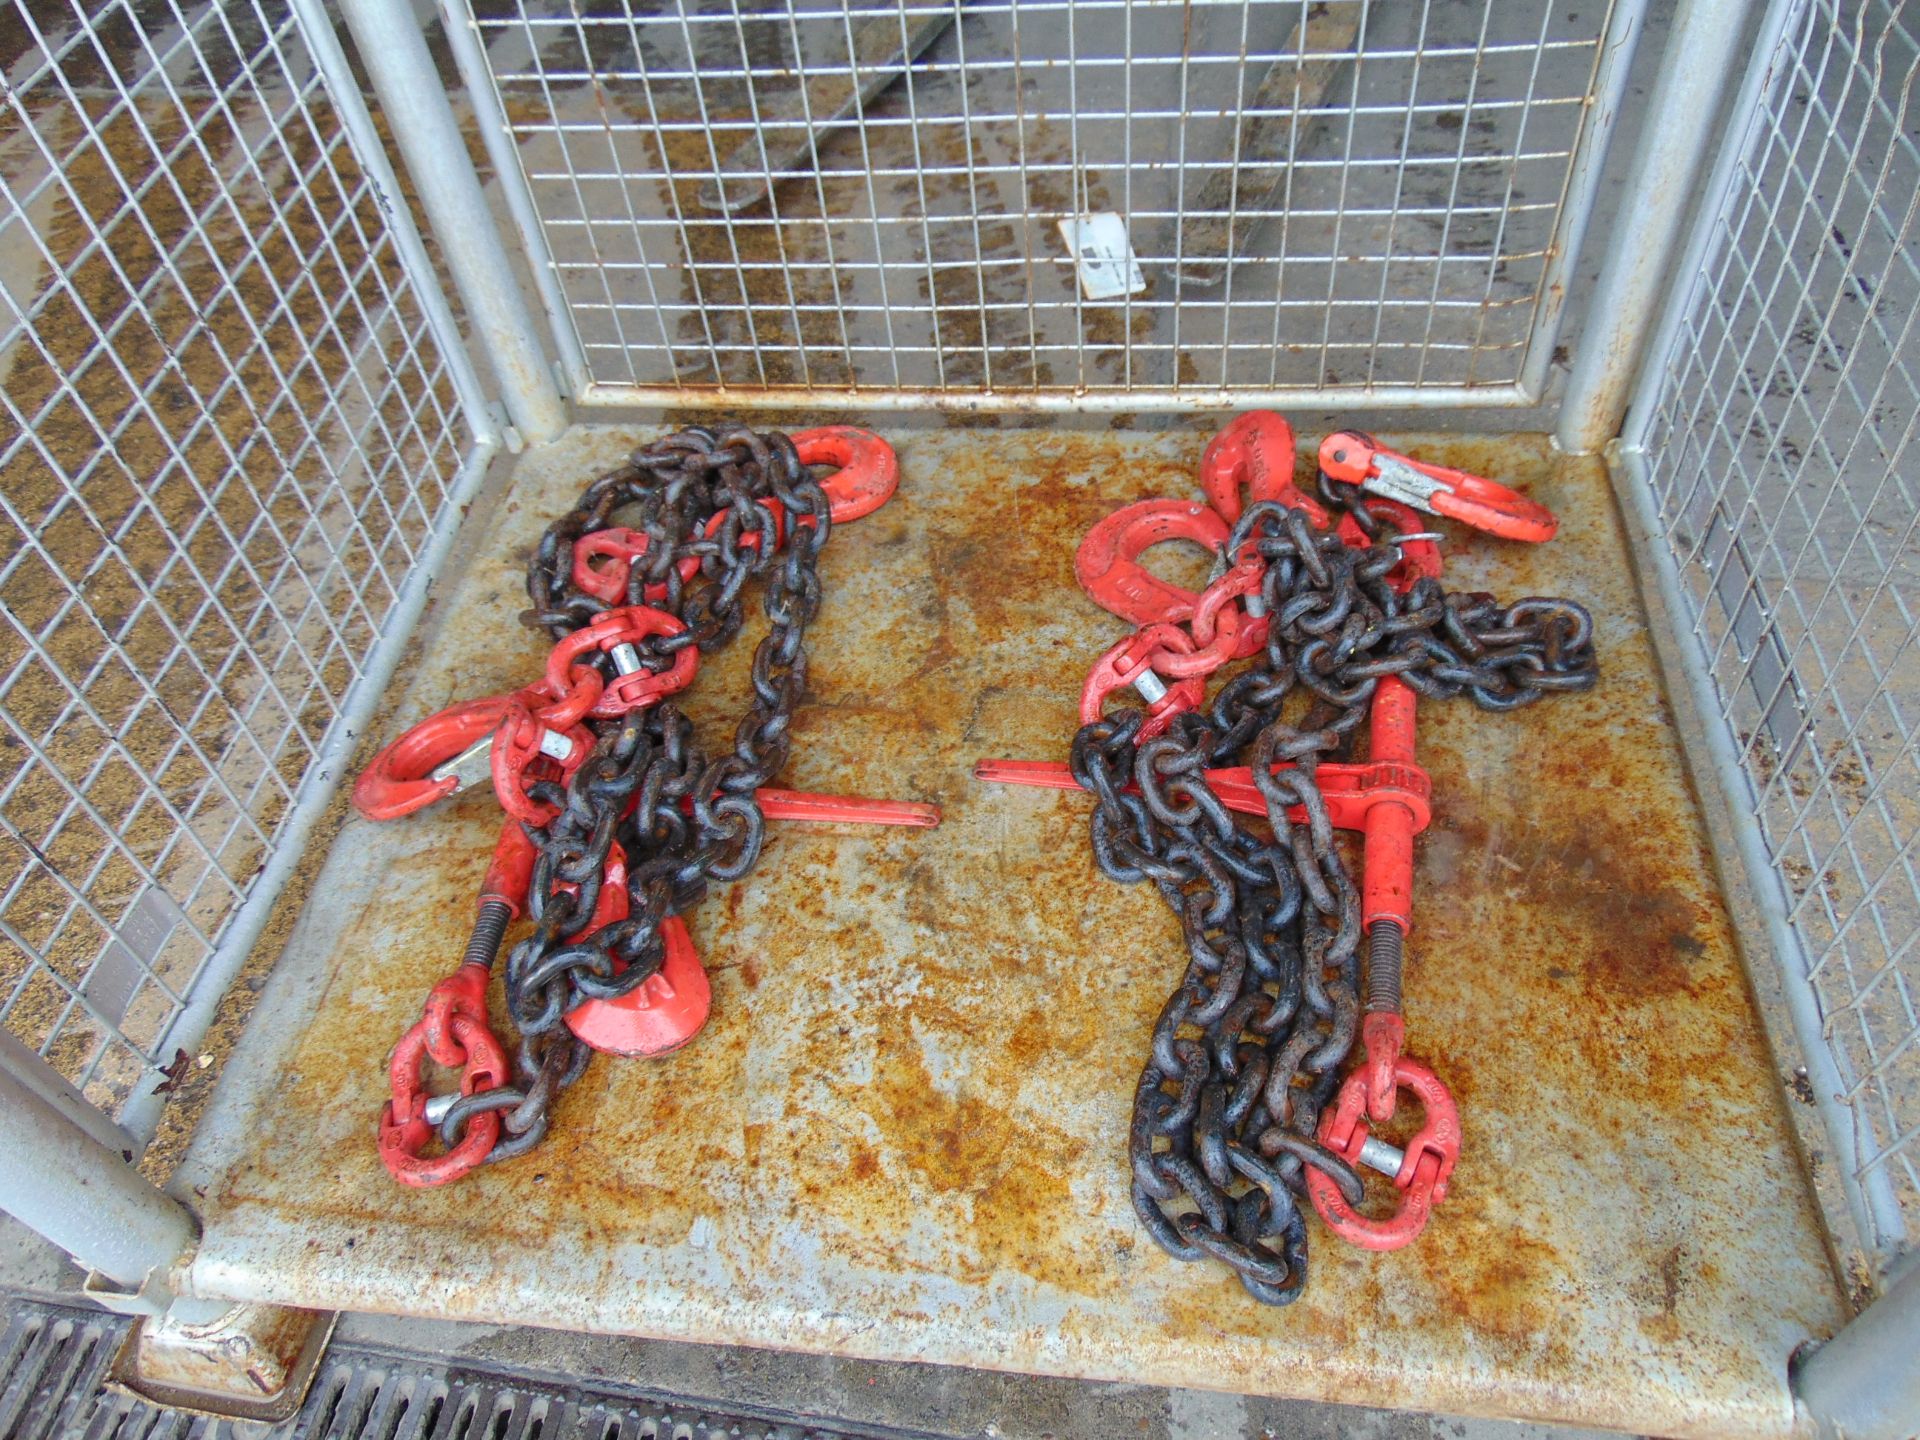 2 x New Unissued Heavy Duty Load Binders, Chains and Hooks from MoD